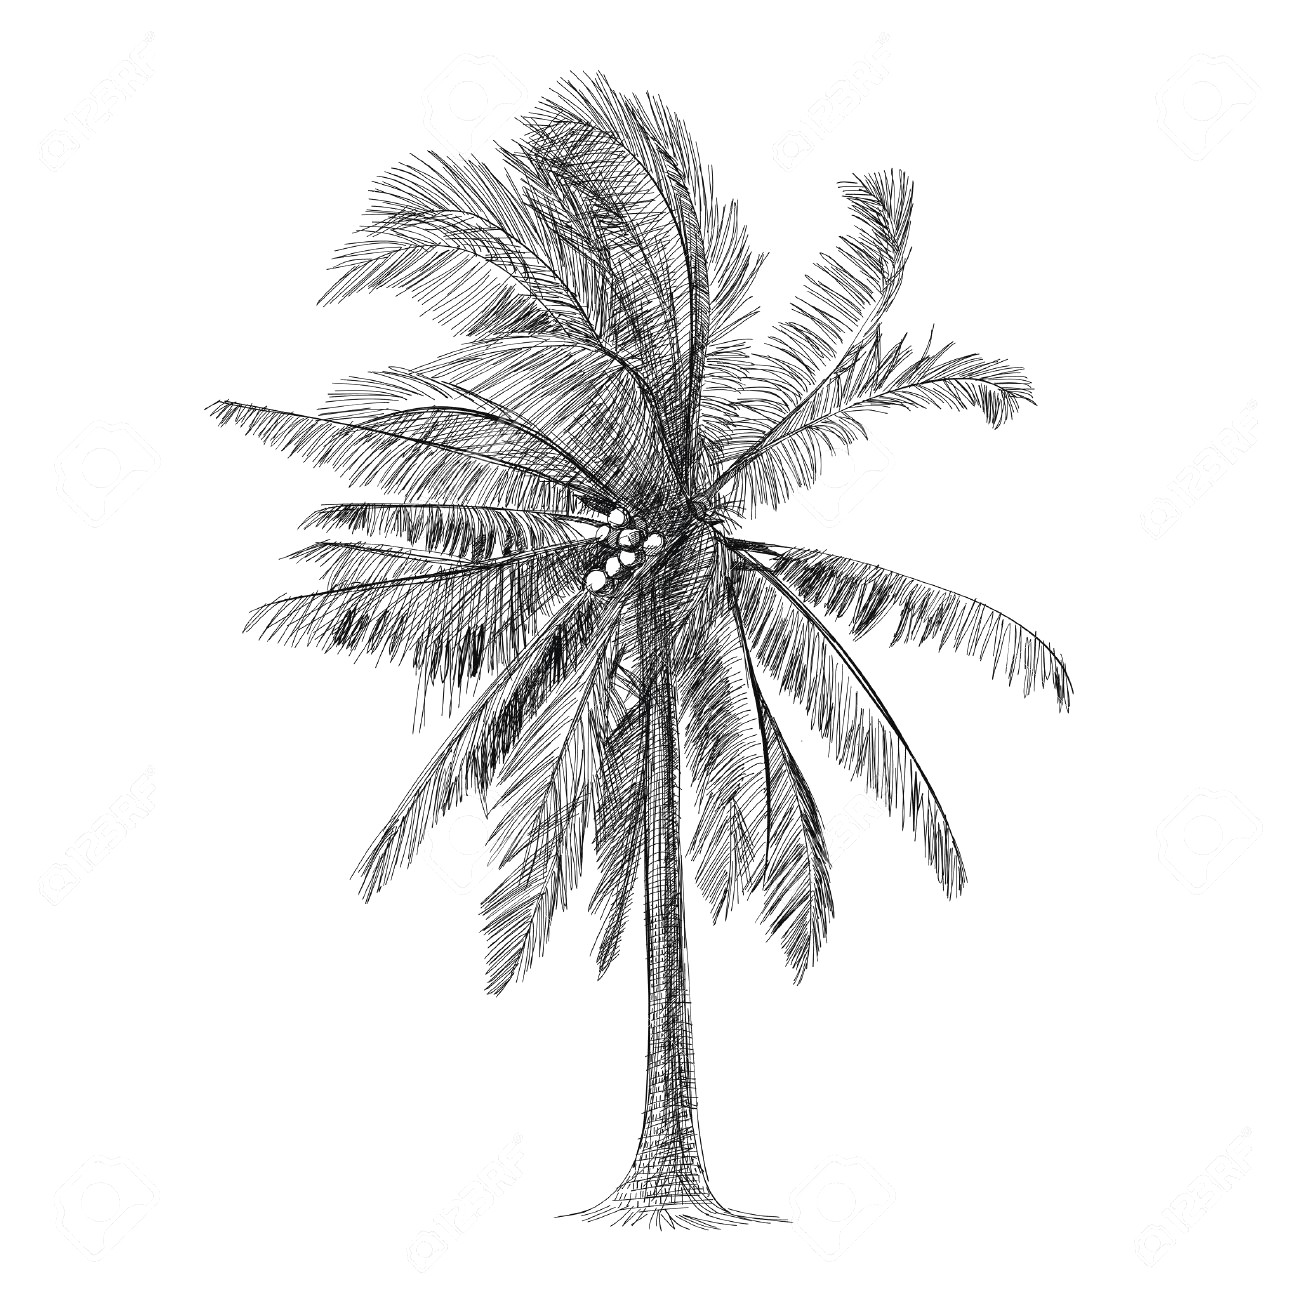 Coconut Tree Drawing / How to Draw a Coconut Tree? Step by Step